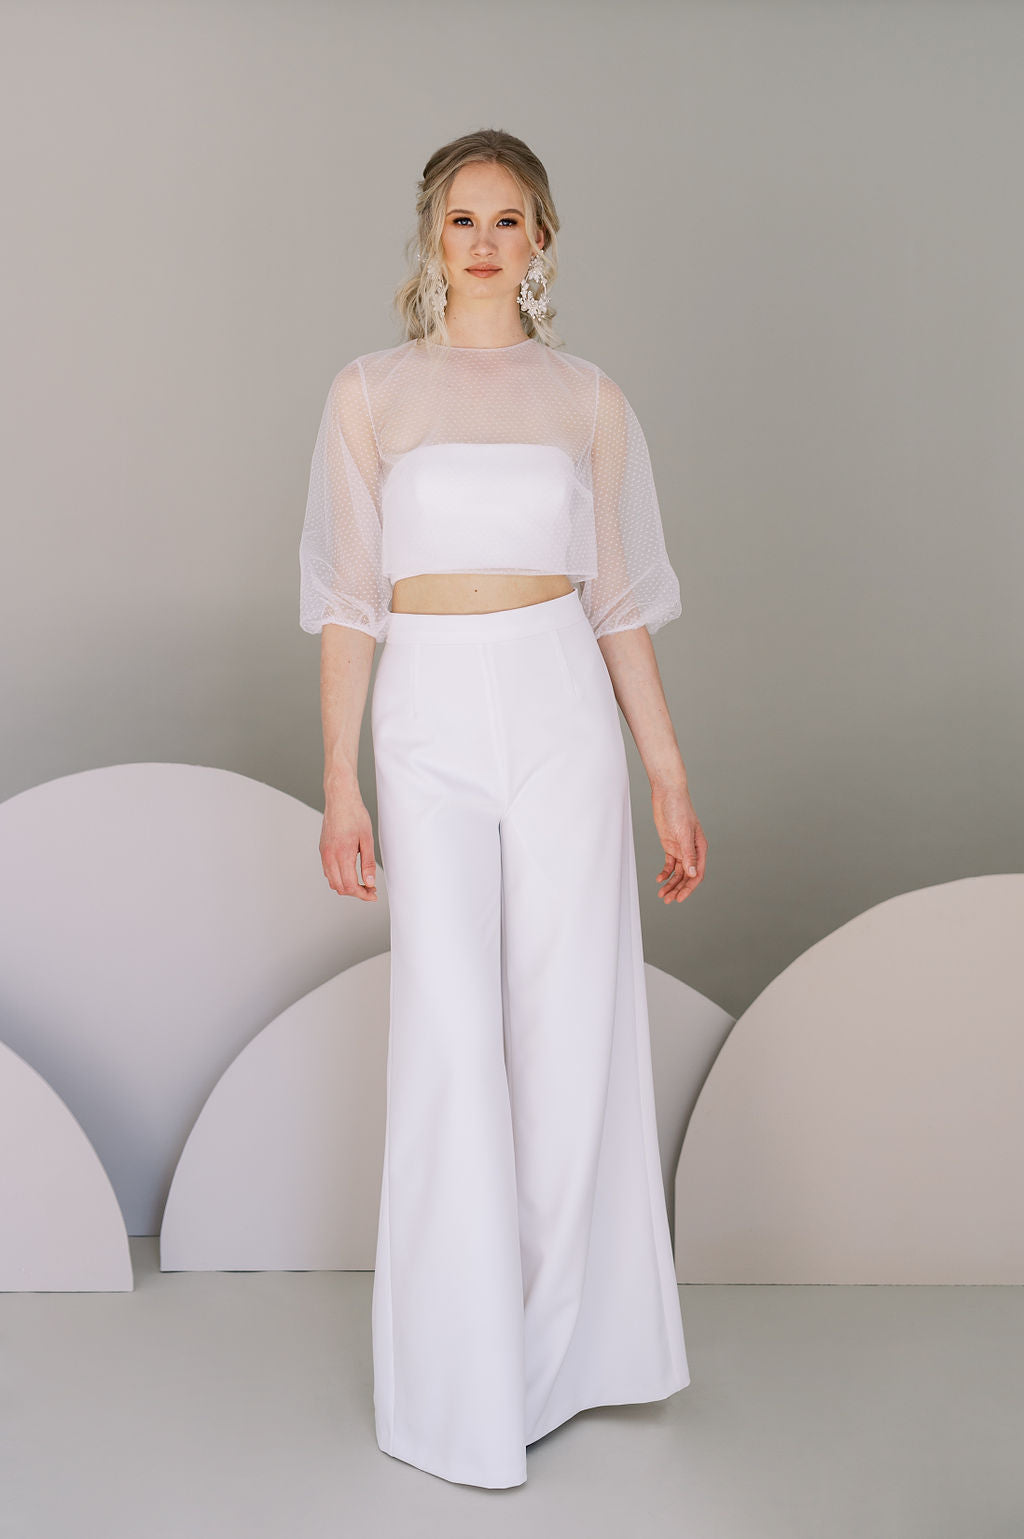 Chic bridal wedding pants for a casual bridal outfit. Stretch crepe palazzo trousers with a tapered fit at the waist. Designed by Catherine Langlois, Canada.